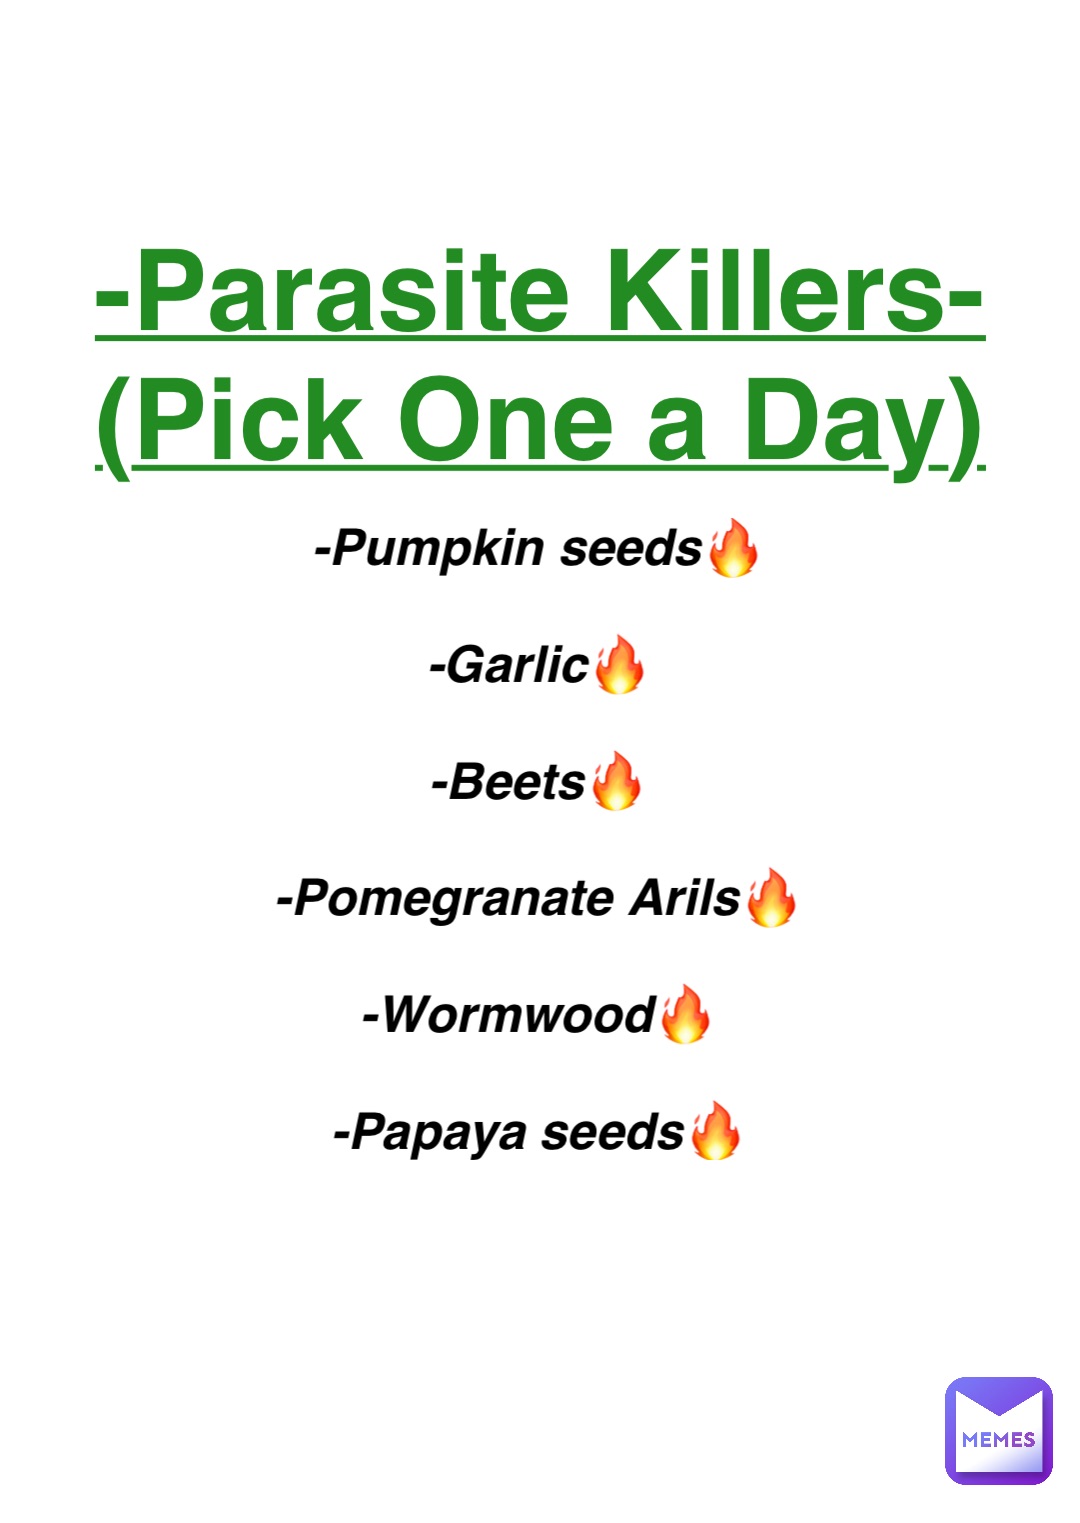 Double tap to edit -Parasite Killers-
(Pick One a Day) -Pumpkin seeds🔥

-Garlic🔥

-Beets🔥

-Pomegranate Arils🔥

-Wormwood🔥

-Papaya seeds🔥